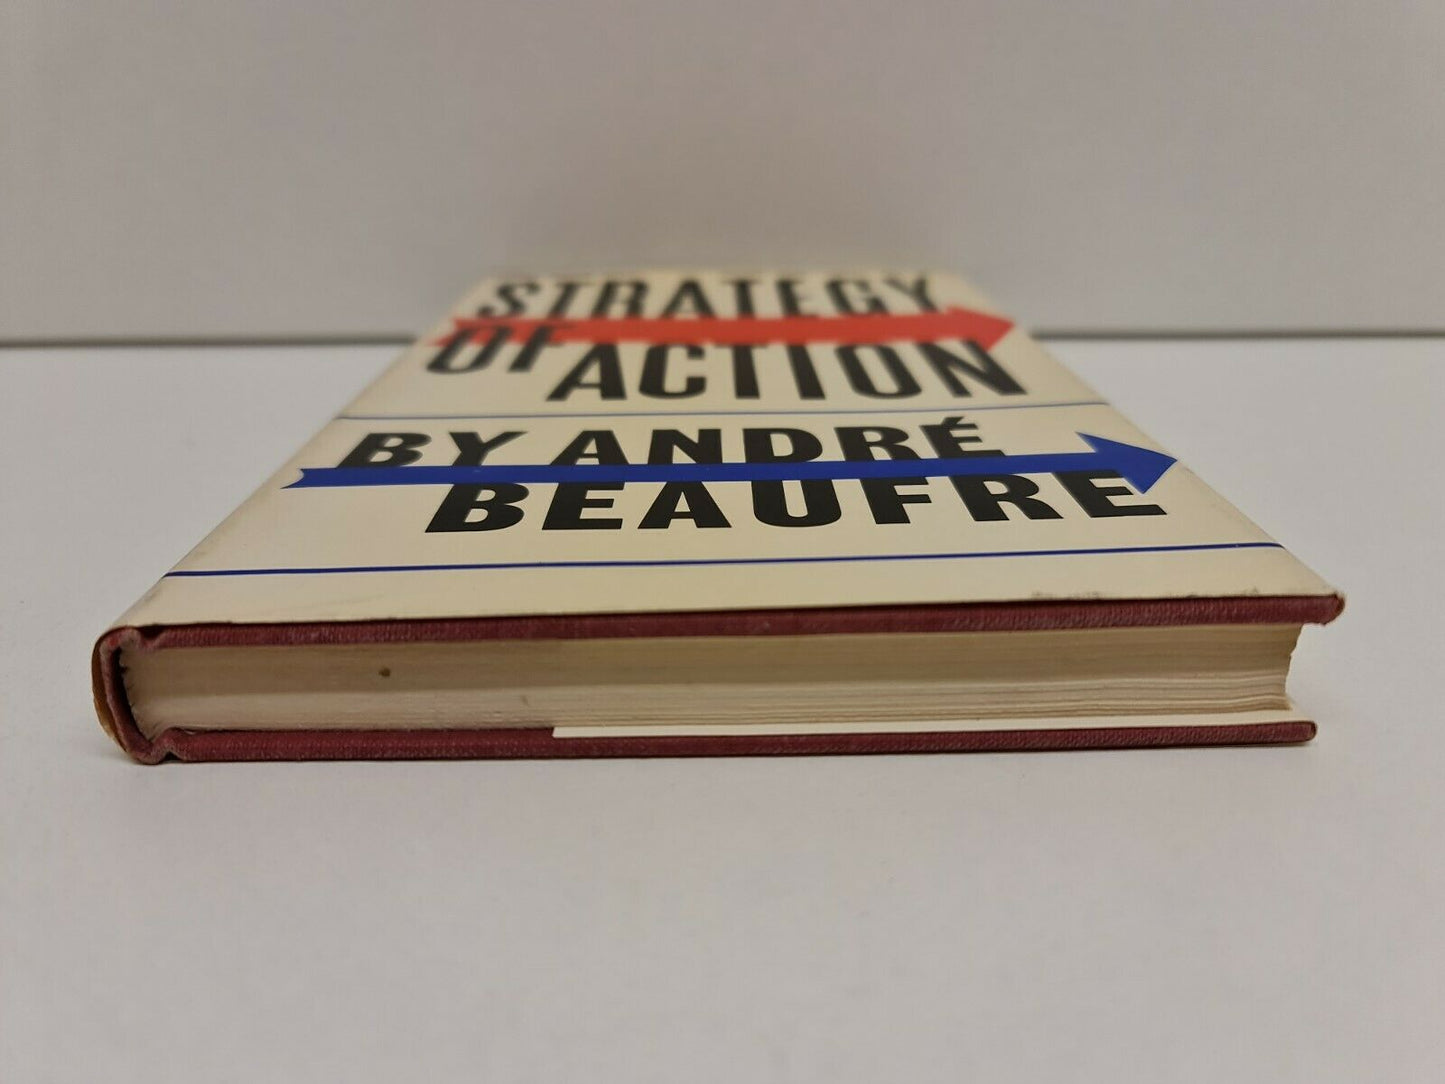 Strategy of Action by Andre Beaufre (1967)